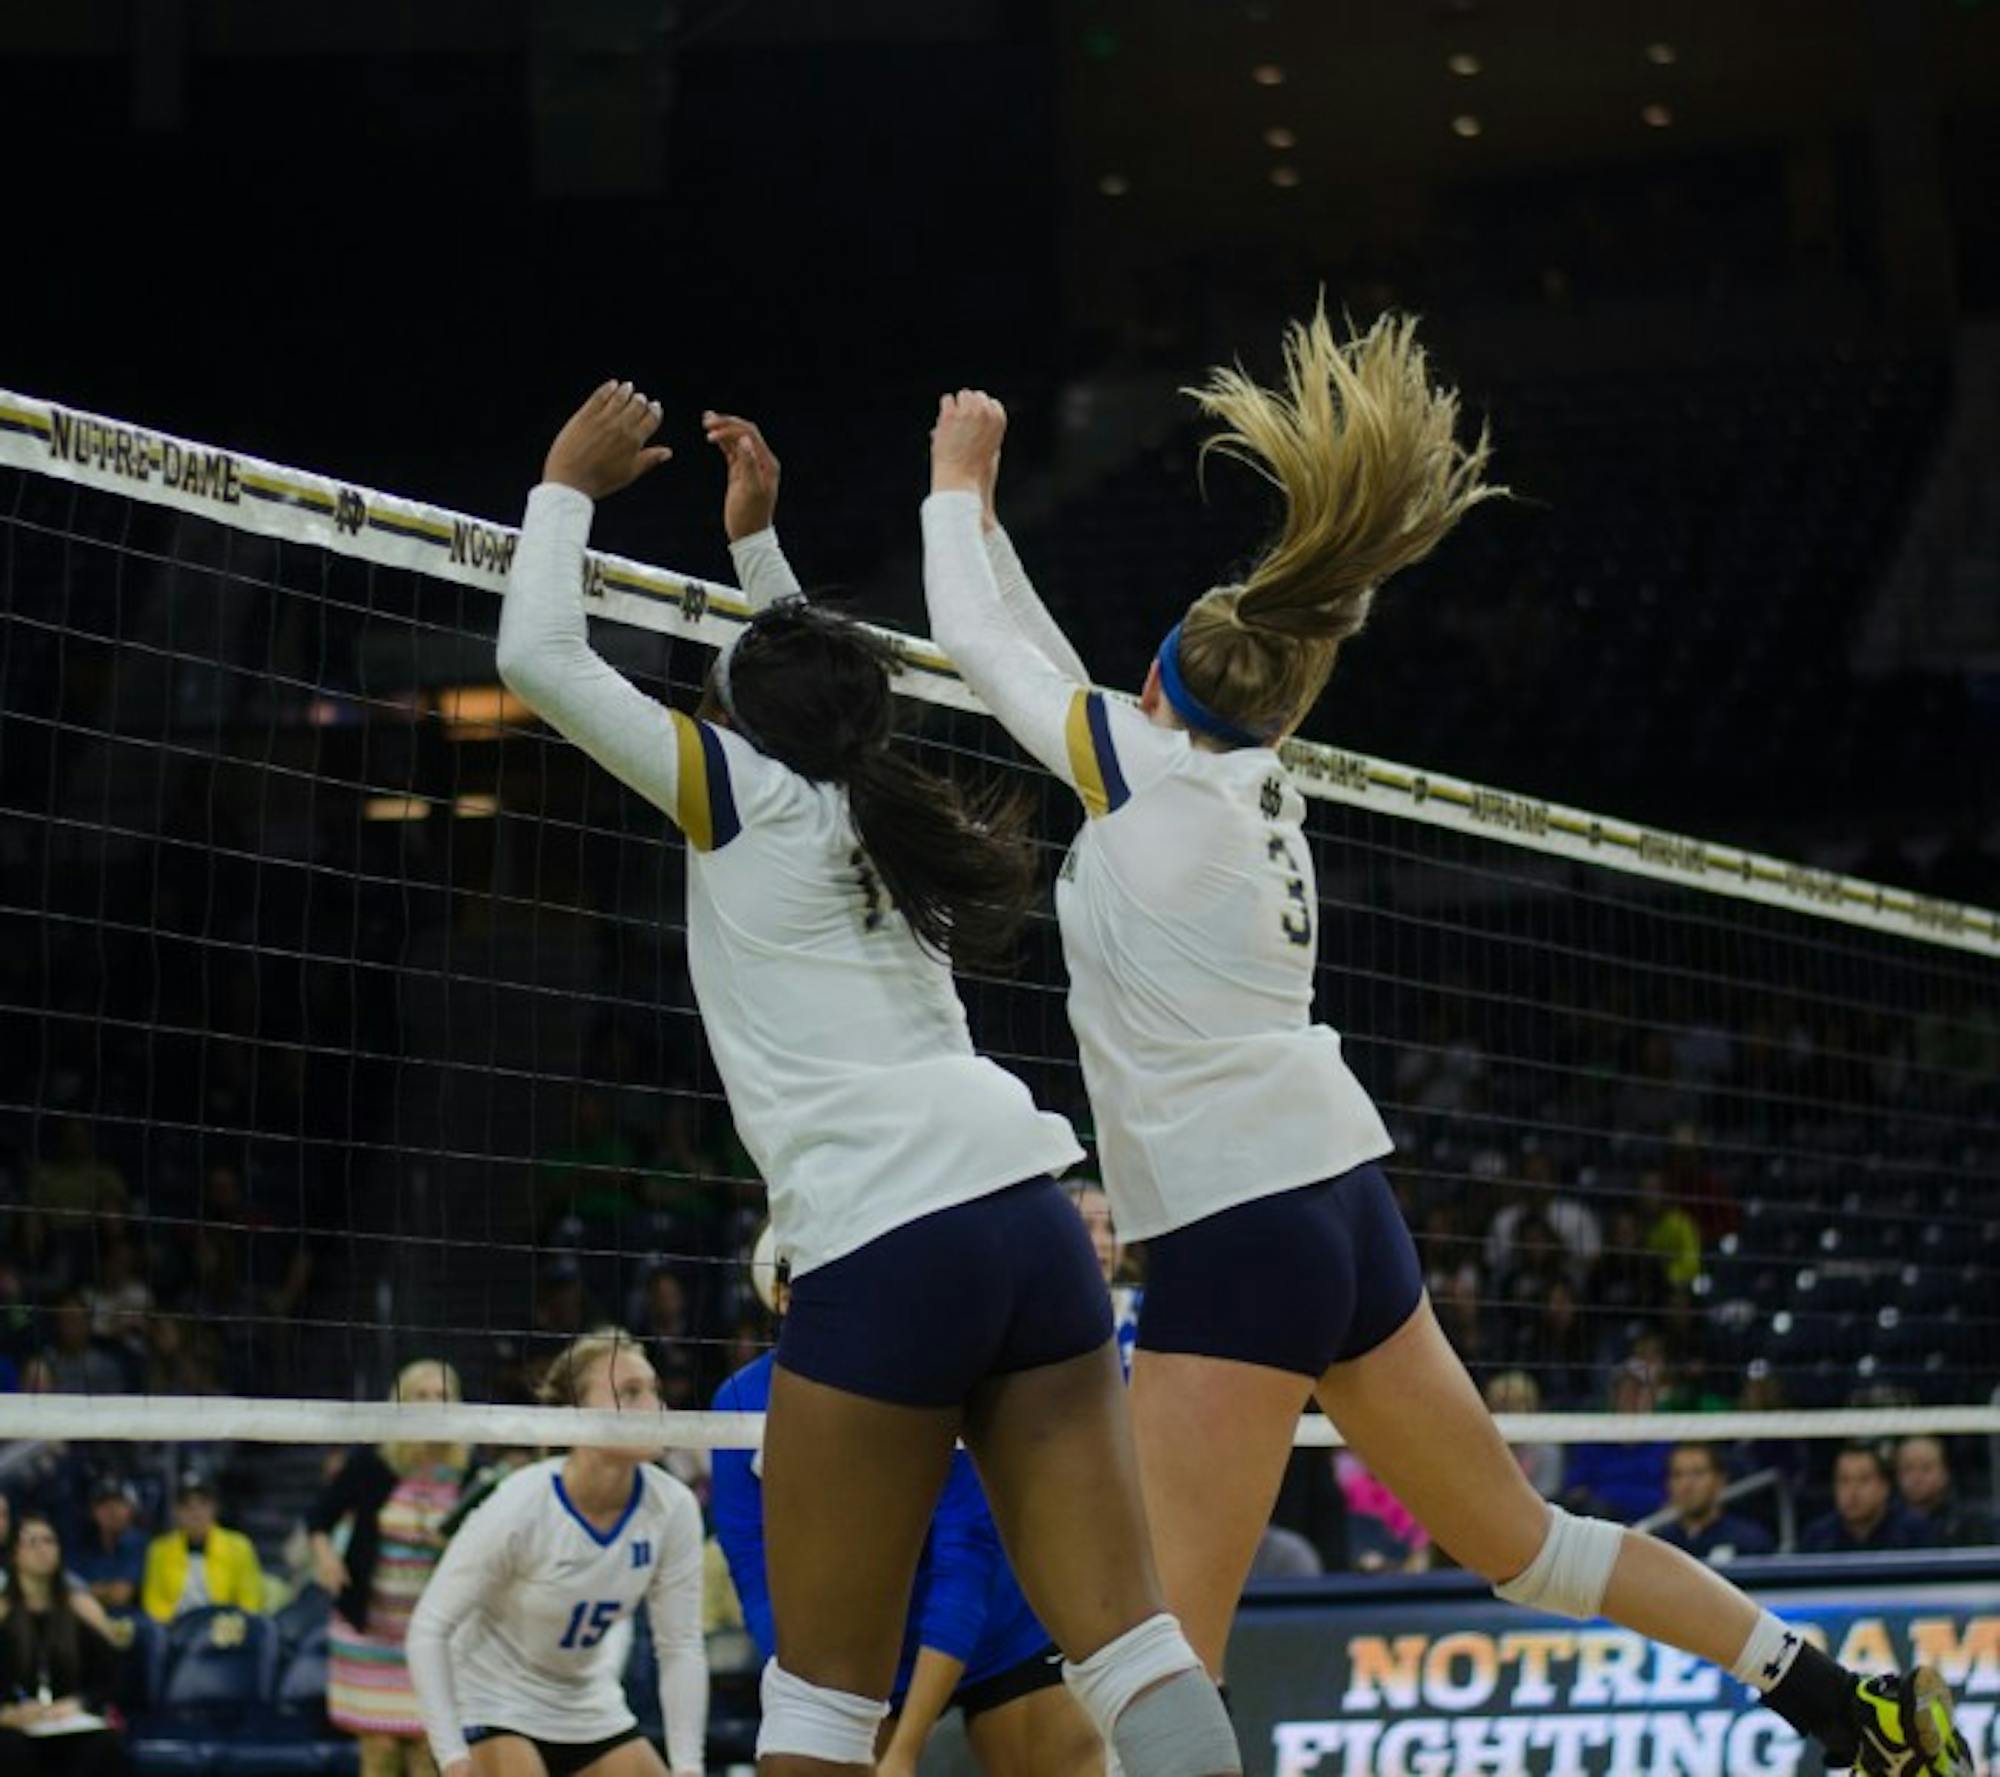 Irish senior middle blocker Sam Fry goes up for a block during Notre Dame’s 3-1 victory over Duke on Sept. 30, 2016, at Purcell Pavilion. Fry and senior Caroline Holt were named to the preseason All-ACC team.